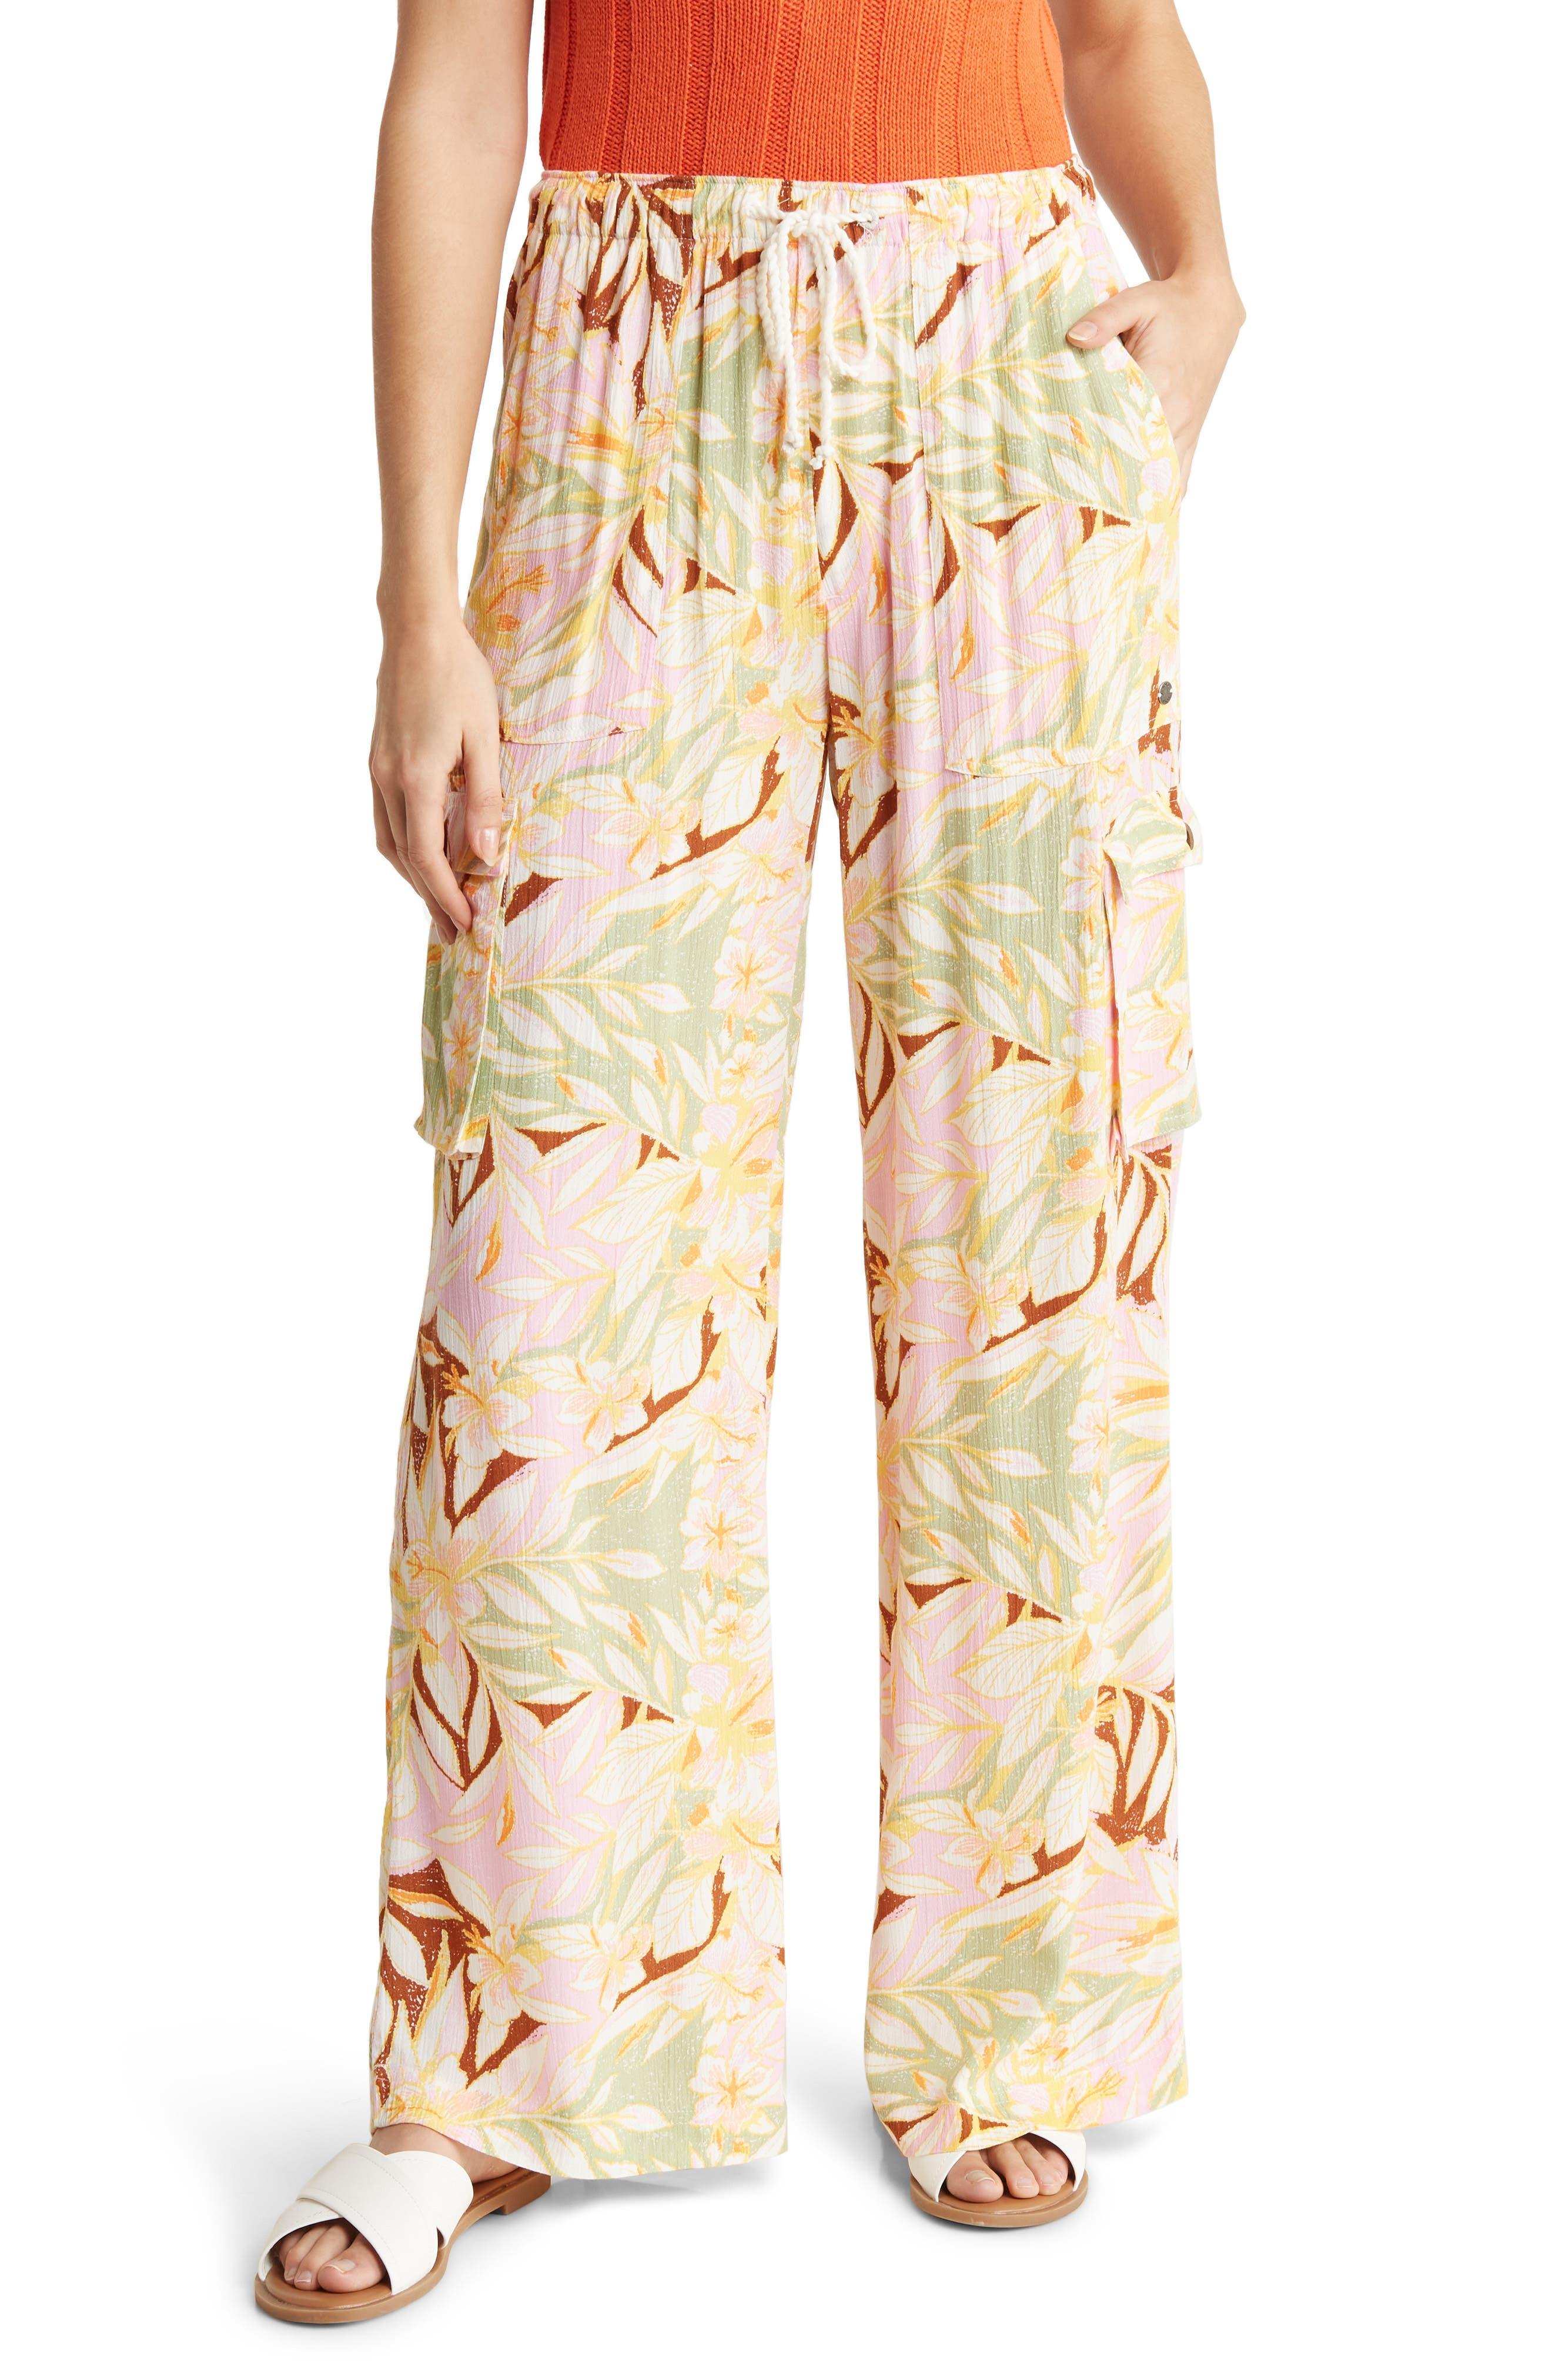 Roxy Precious Floral Print Cargo Pants in Natural | Lyst